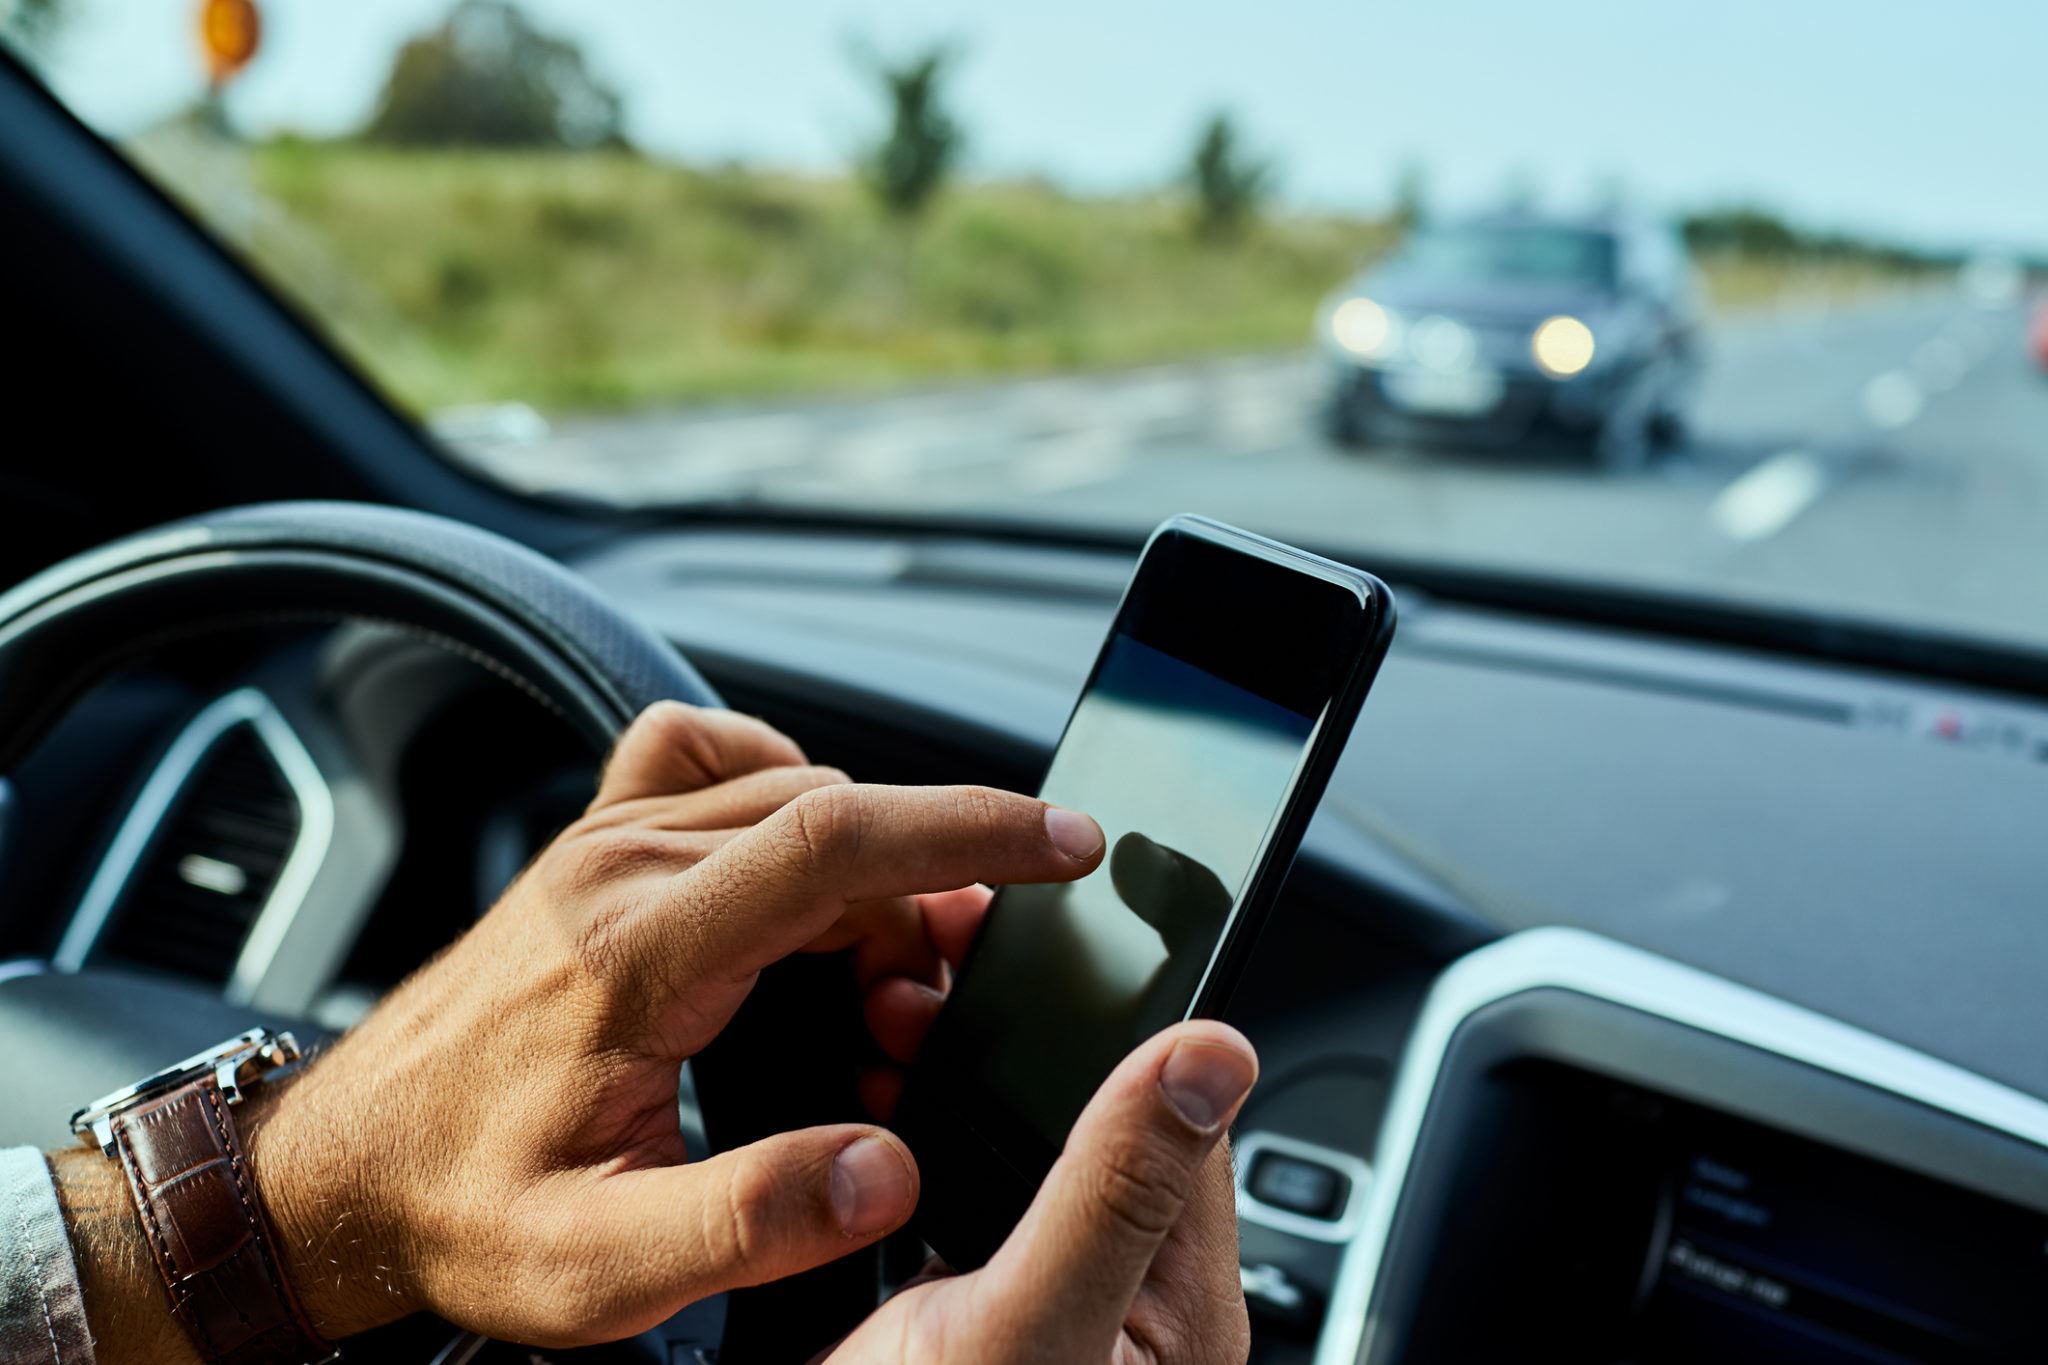 texting and driving poses a serious danger to everyone on the road